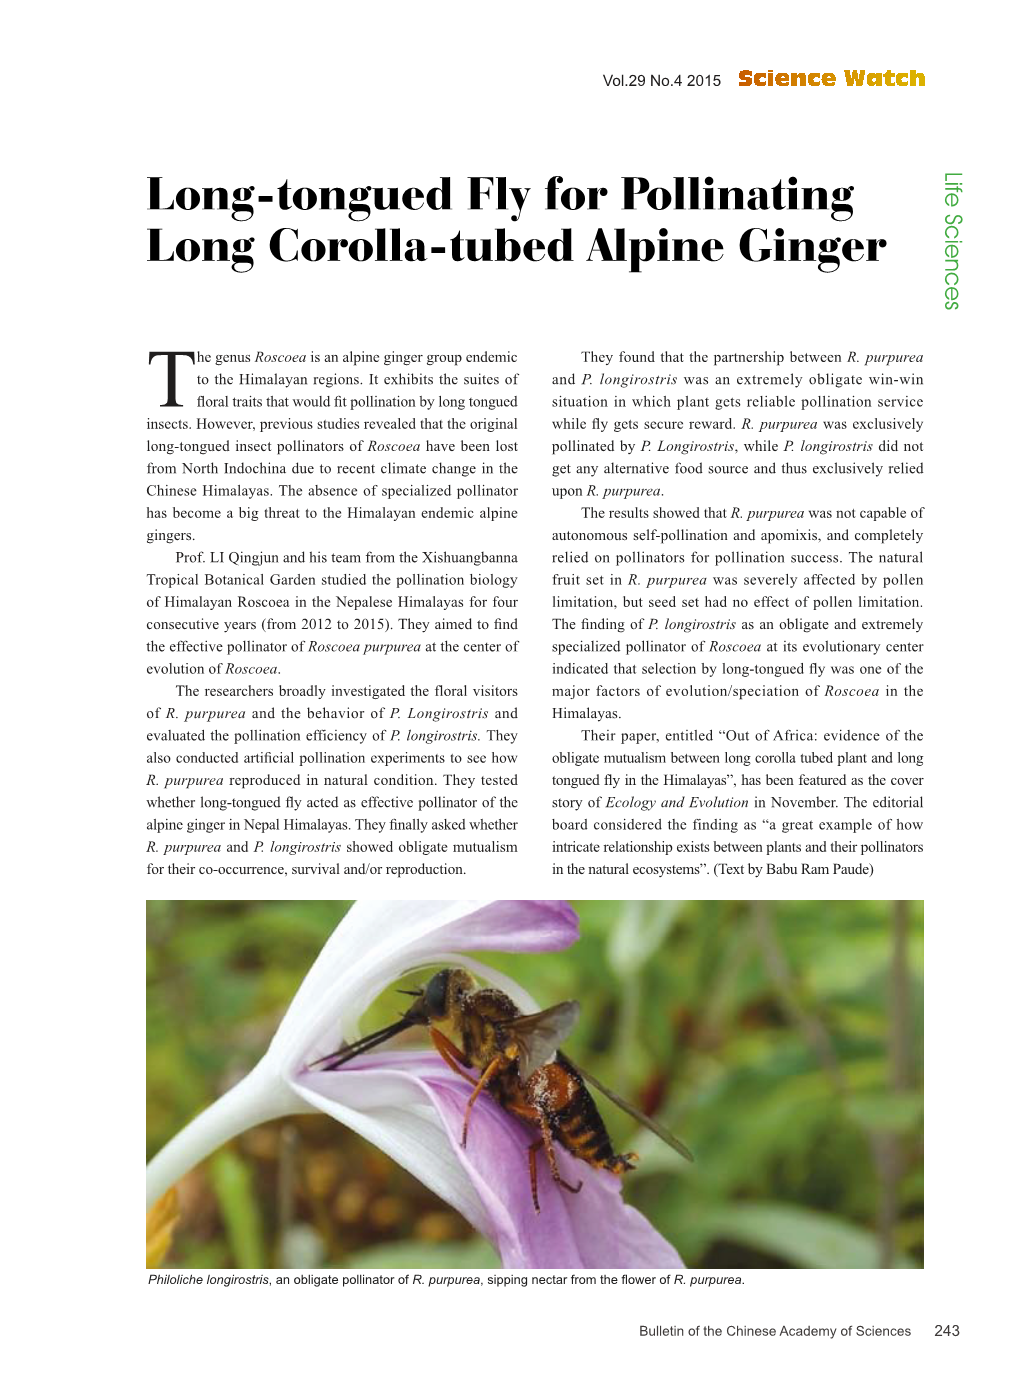 Long-Tongued Fly for Pollinating Long Corolla-Tubed Alpine Ginger